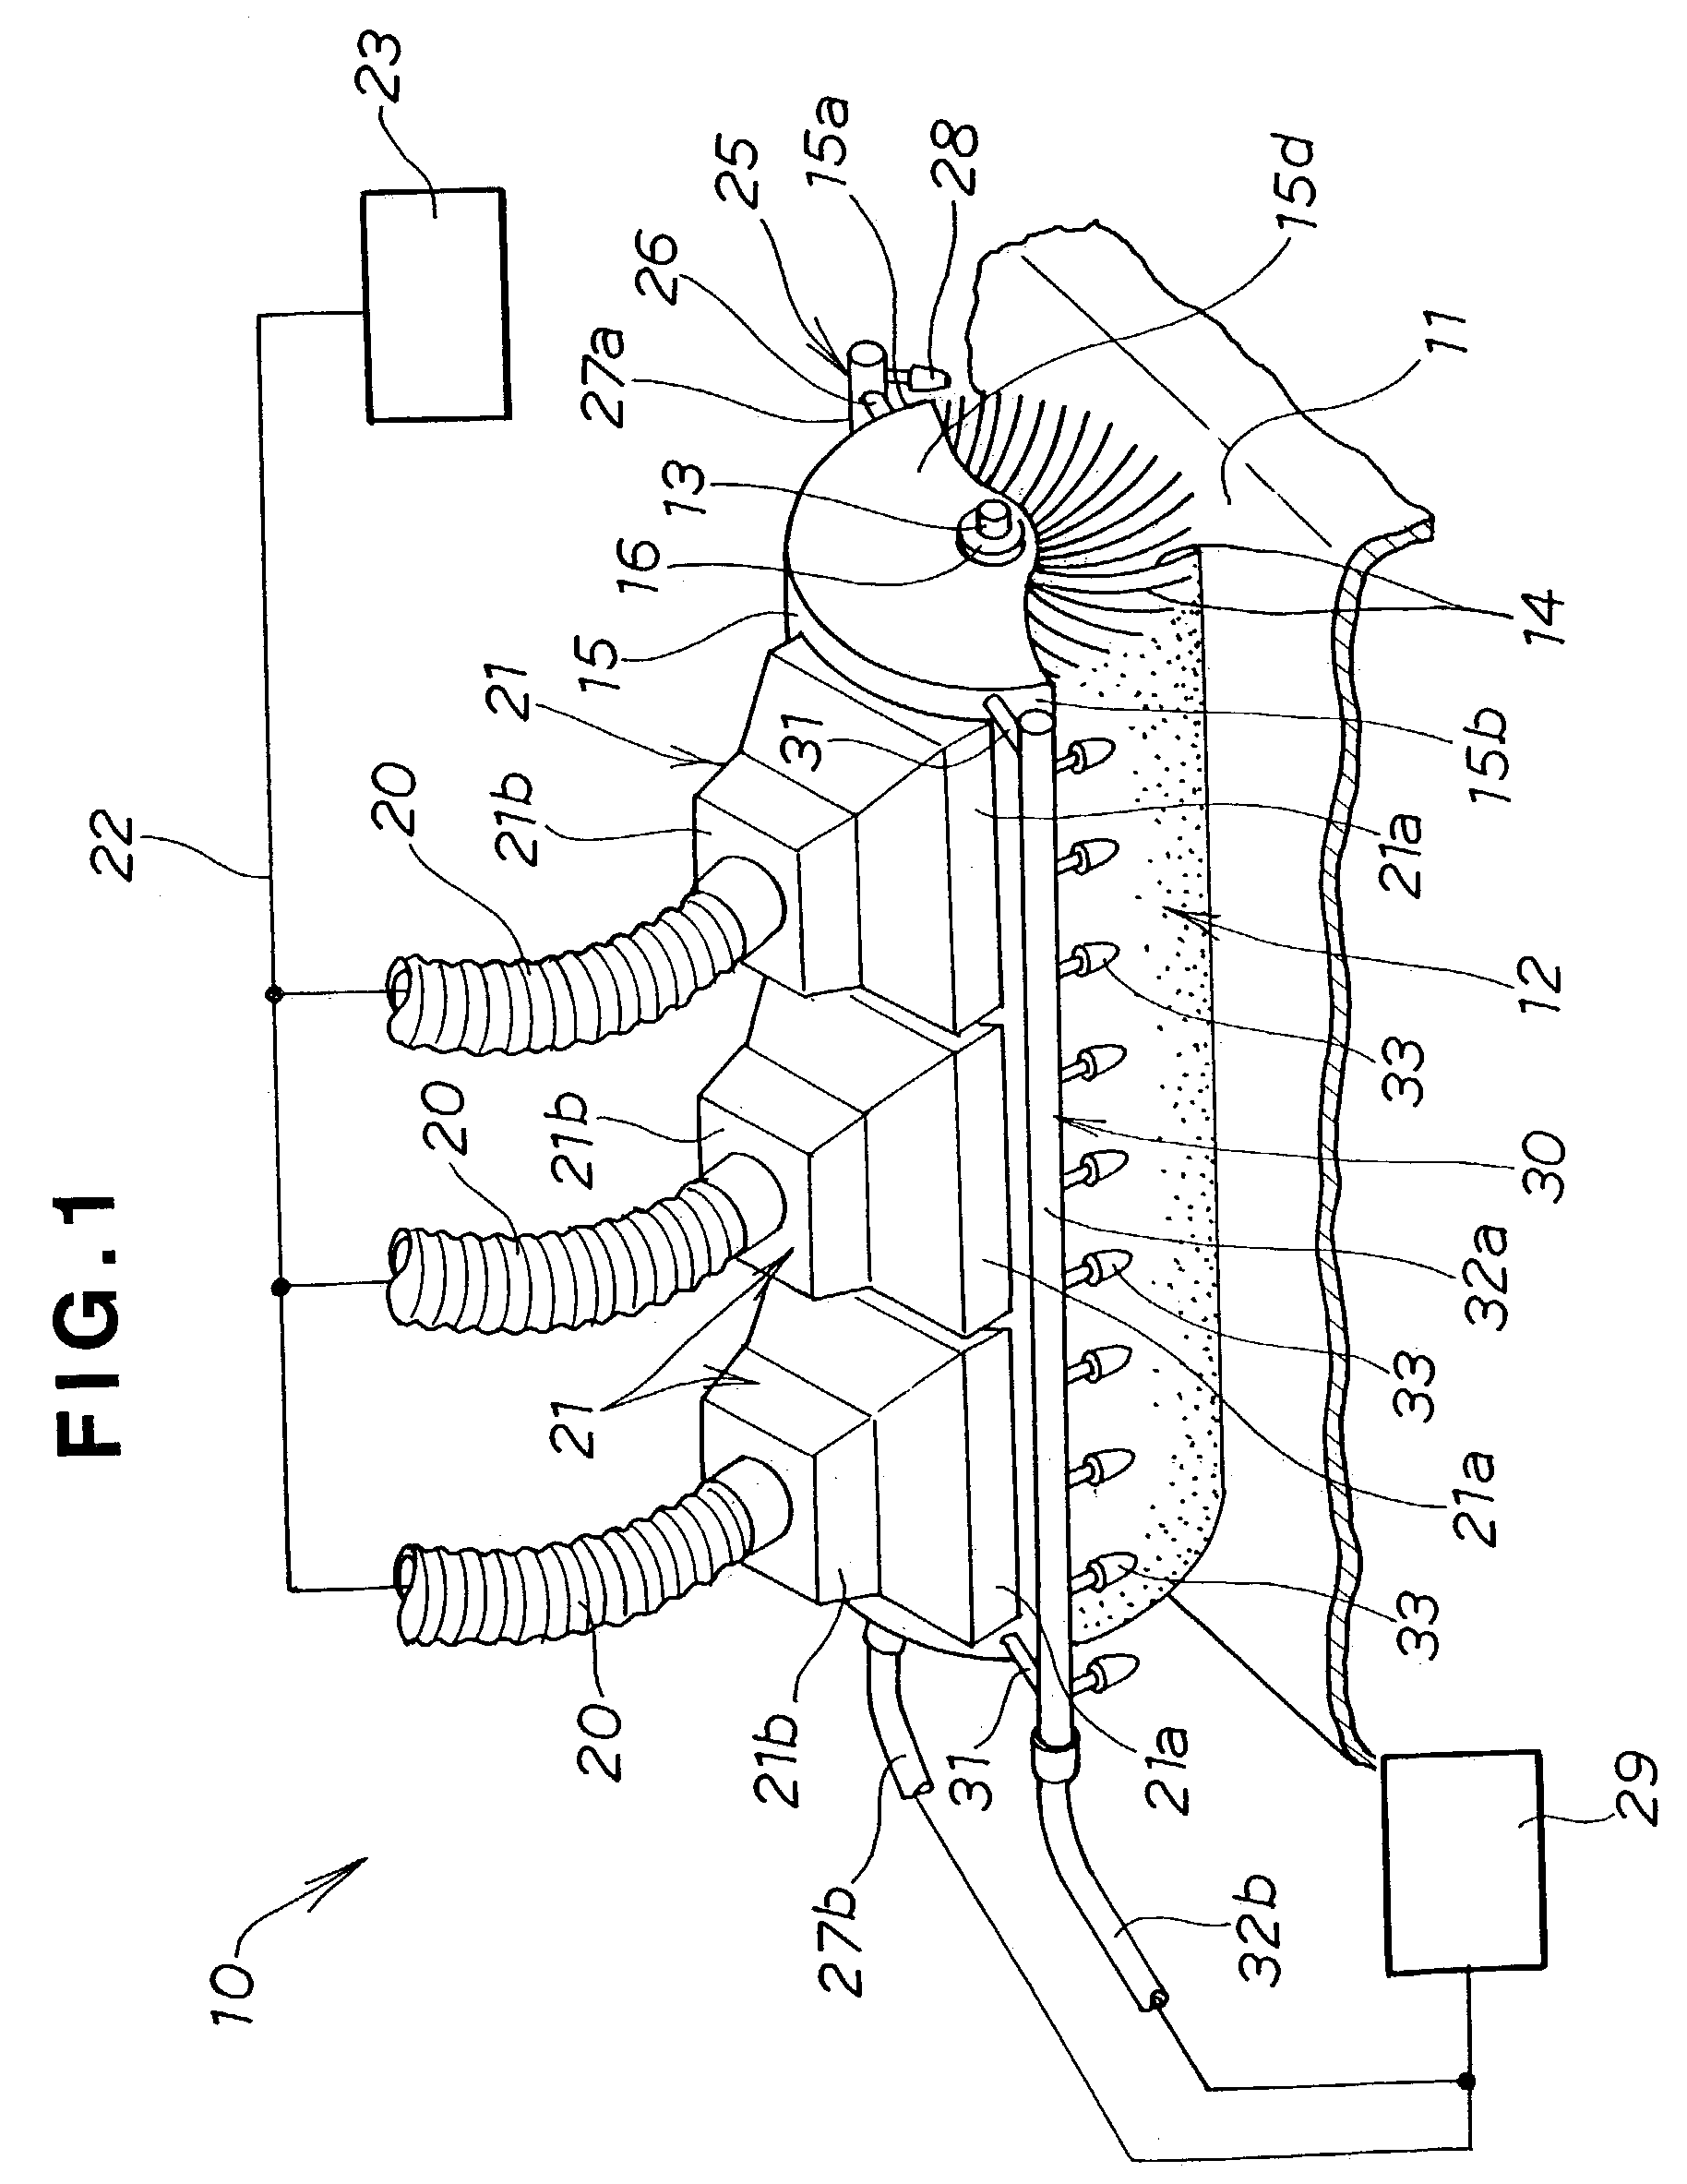 Dust removal apparatus